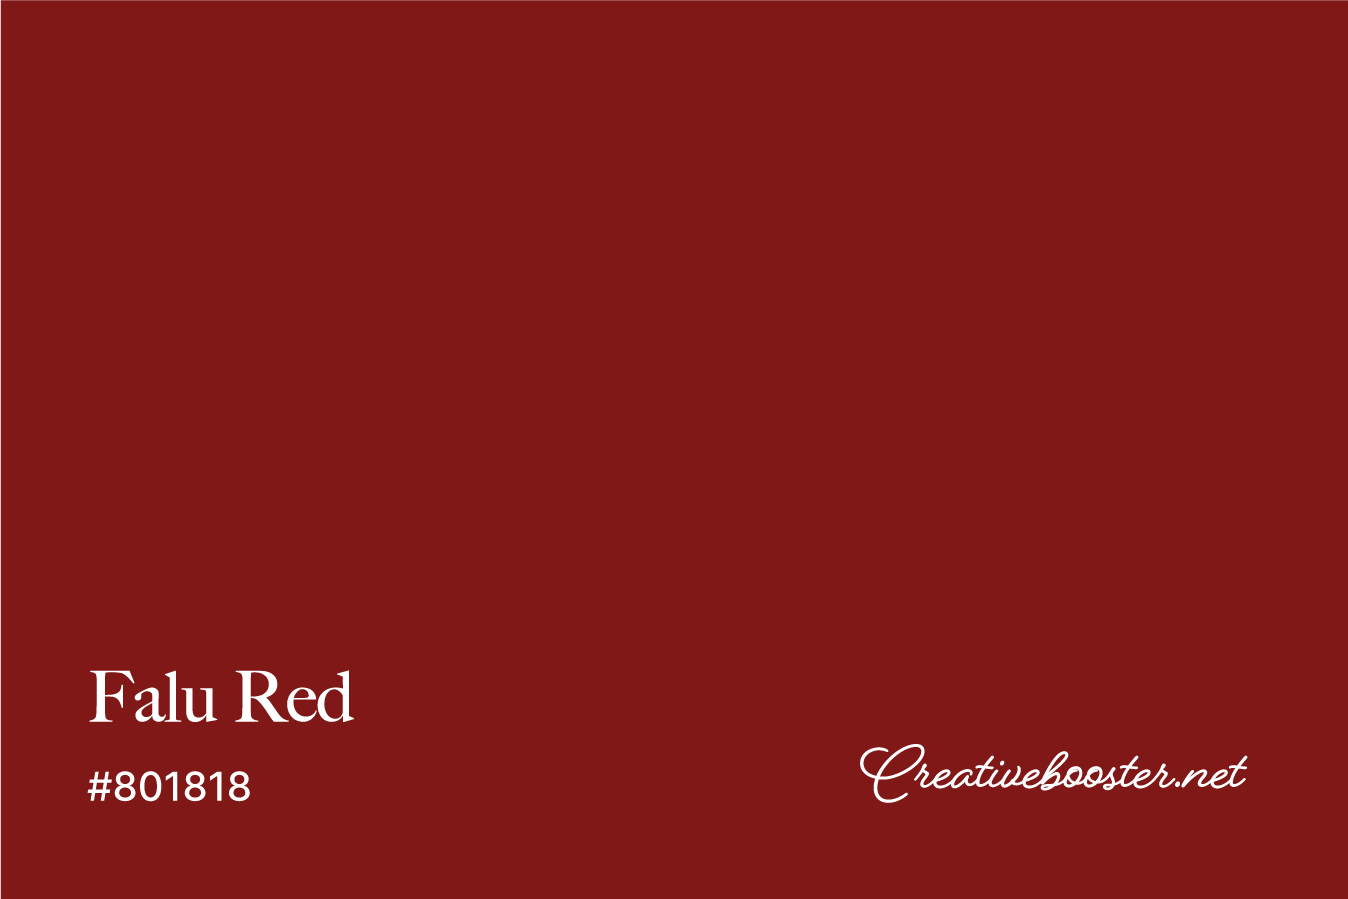 falu-red-color-with-name-and-hex-code-#801818